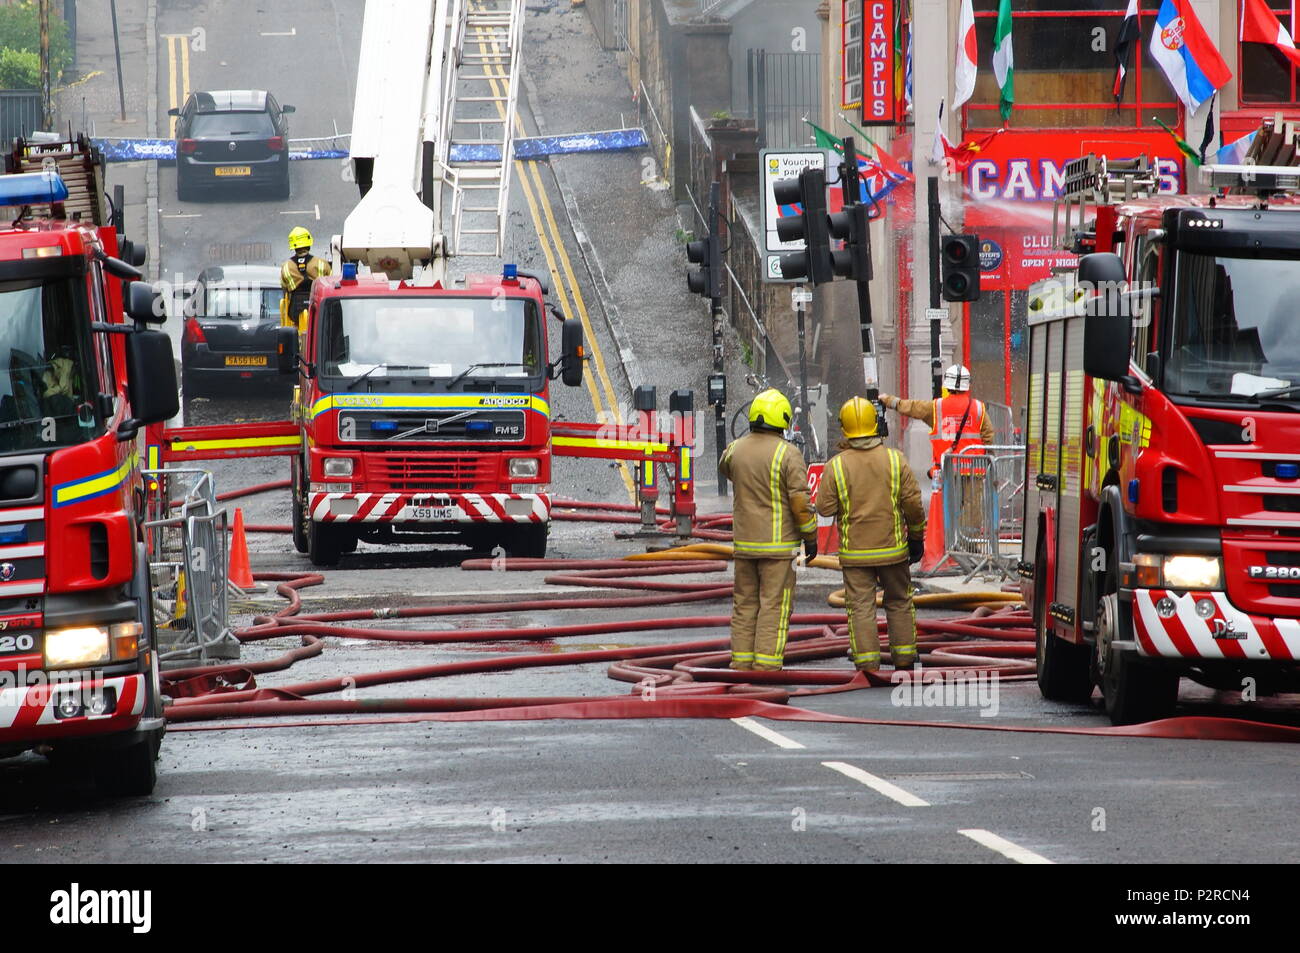 Glasgow, UK. 16th Jun, 2018. Emergency services still at the scene over 24 hours after the blaze began. 120 firefighters and 20 fire engines were called to the scene at around 11:20pm last night. Credit: Pawel Pietraszewski/Alamy Live News Stock Photo